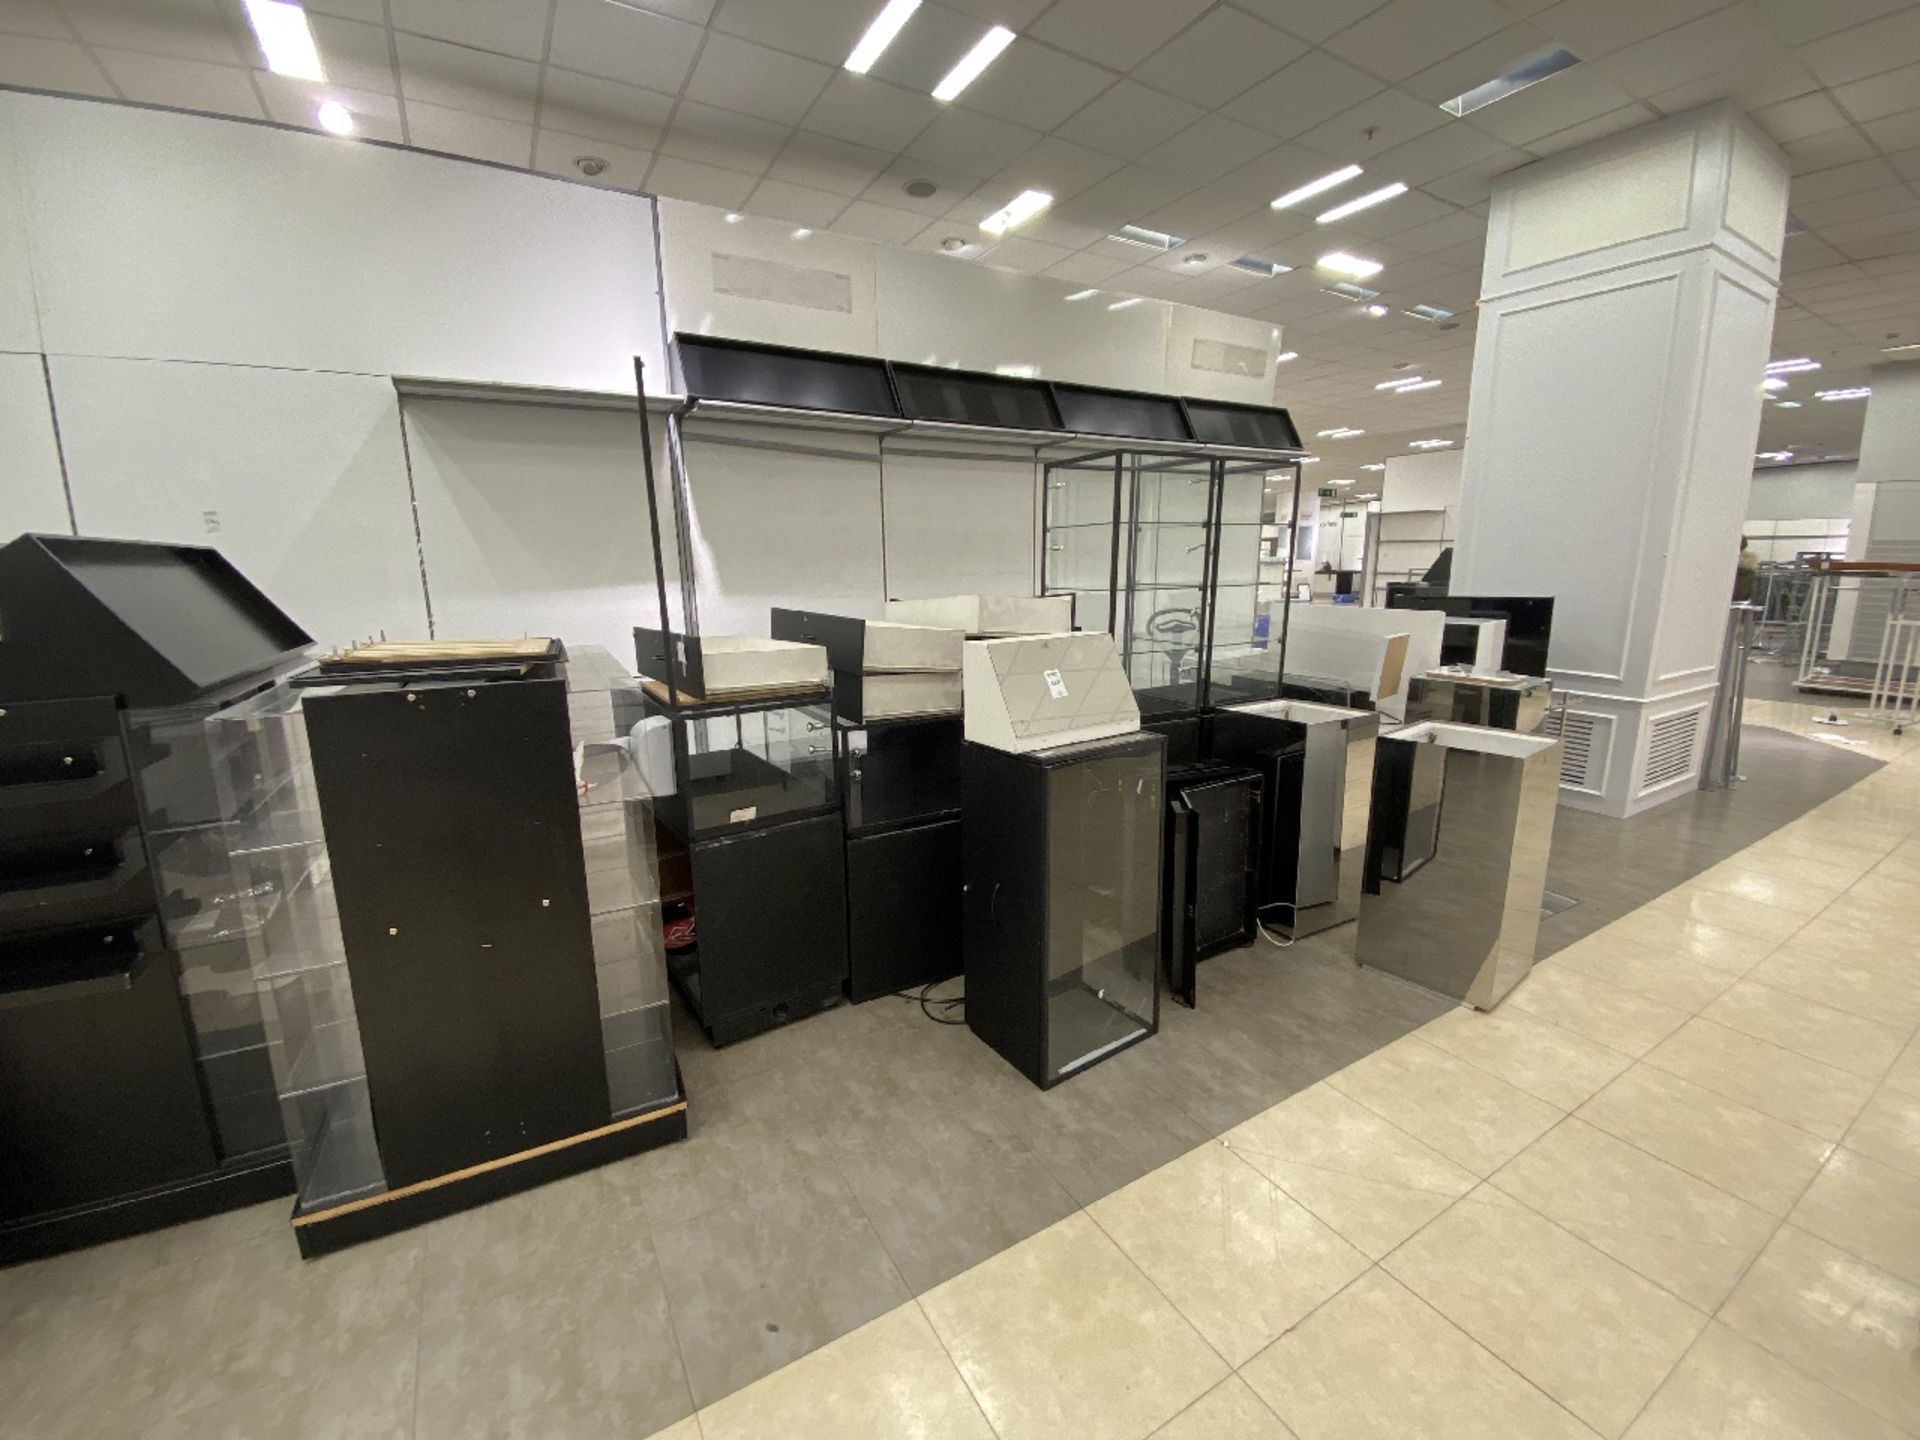 A selection of metal display units